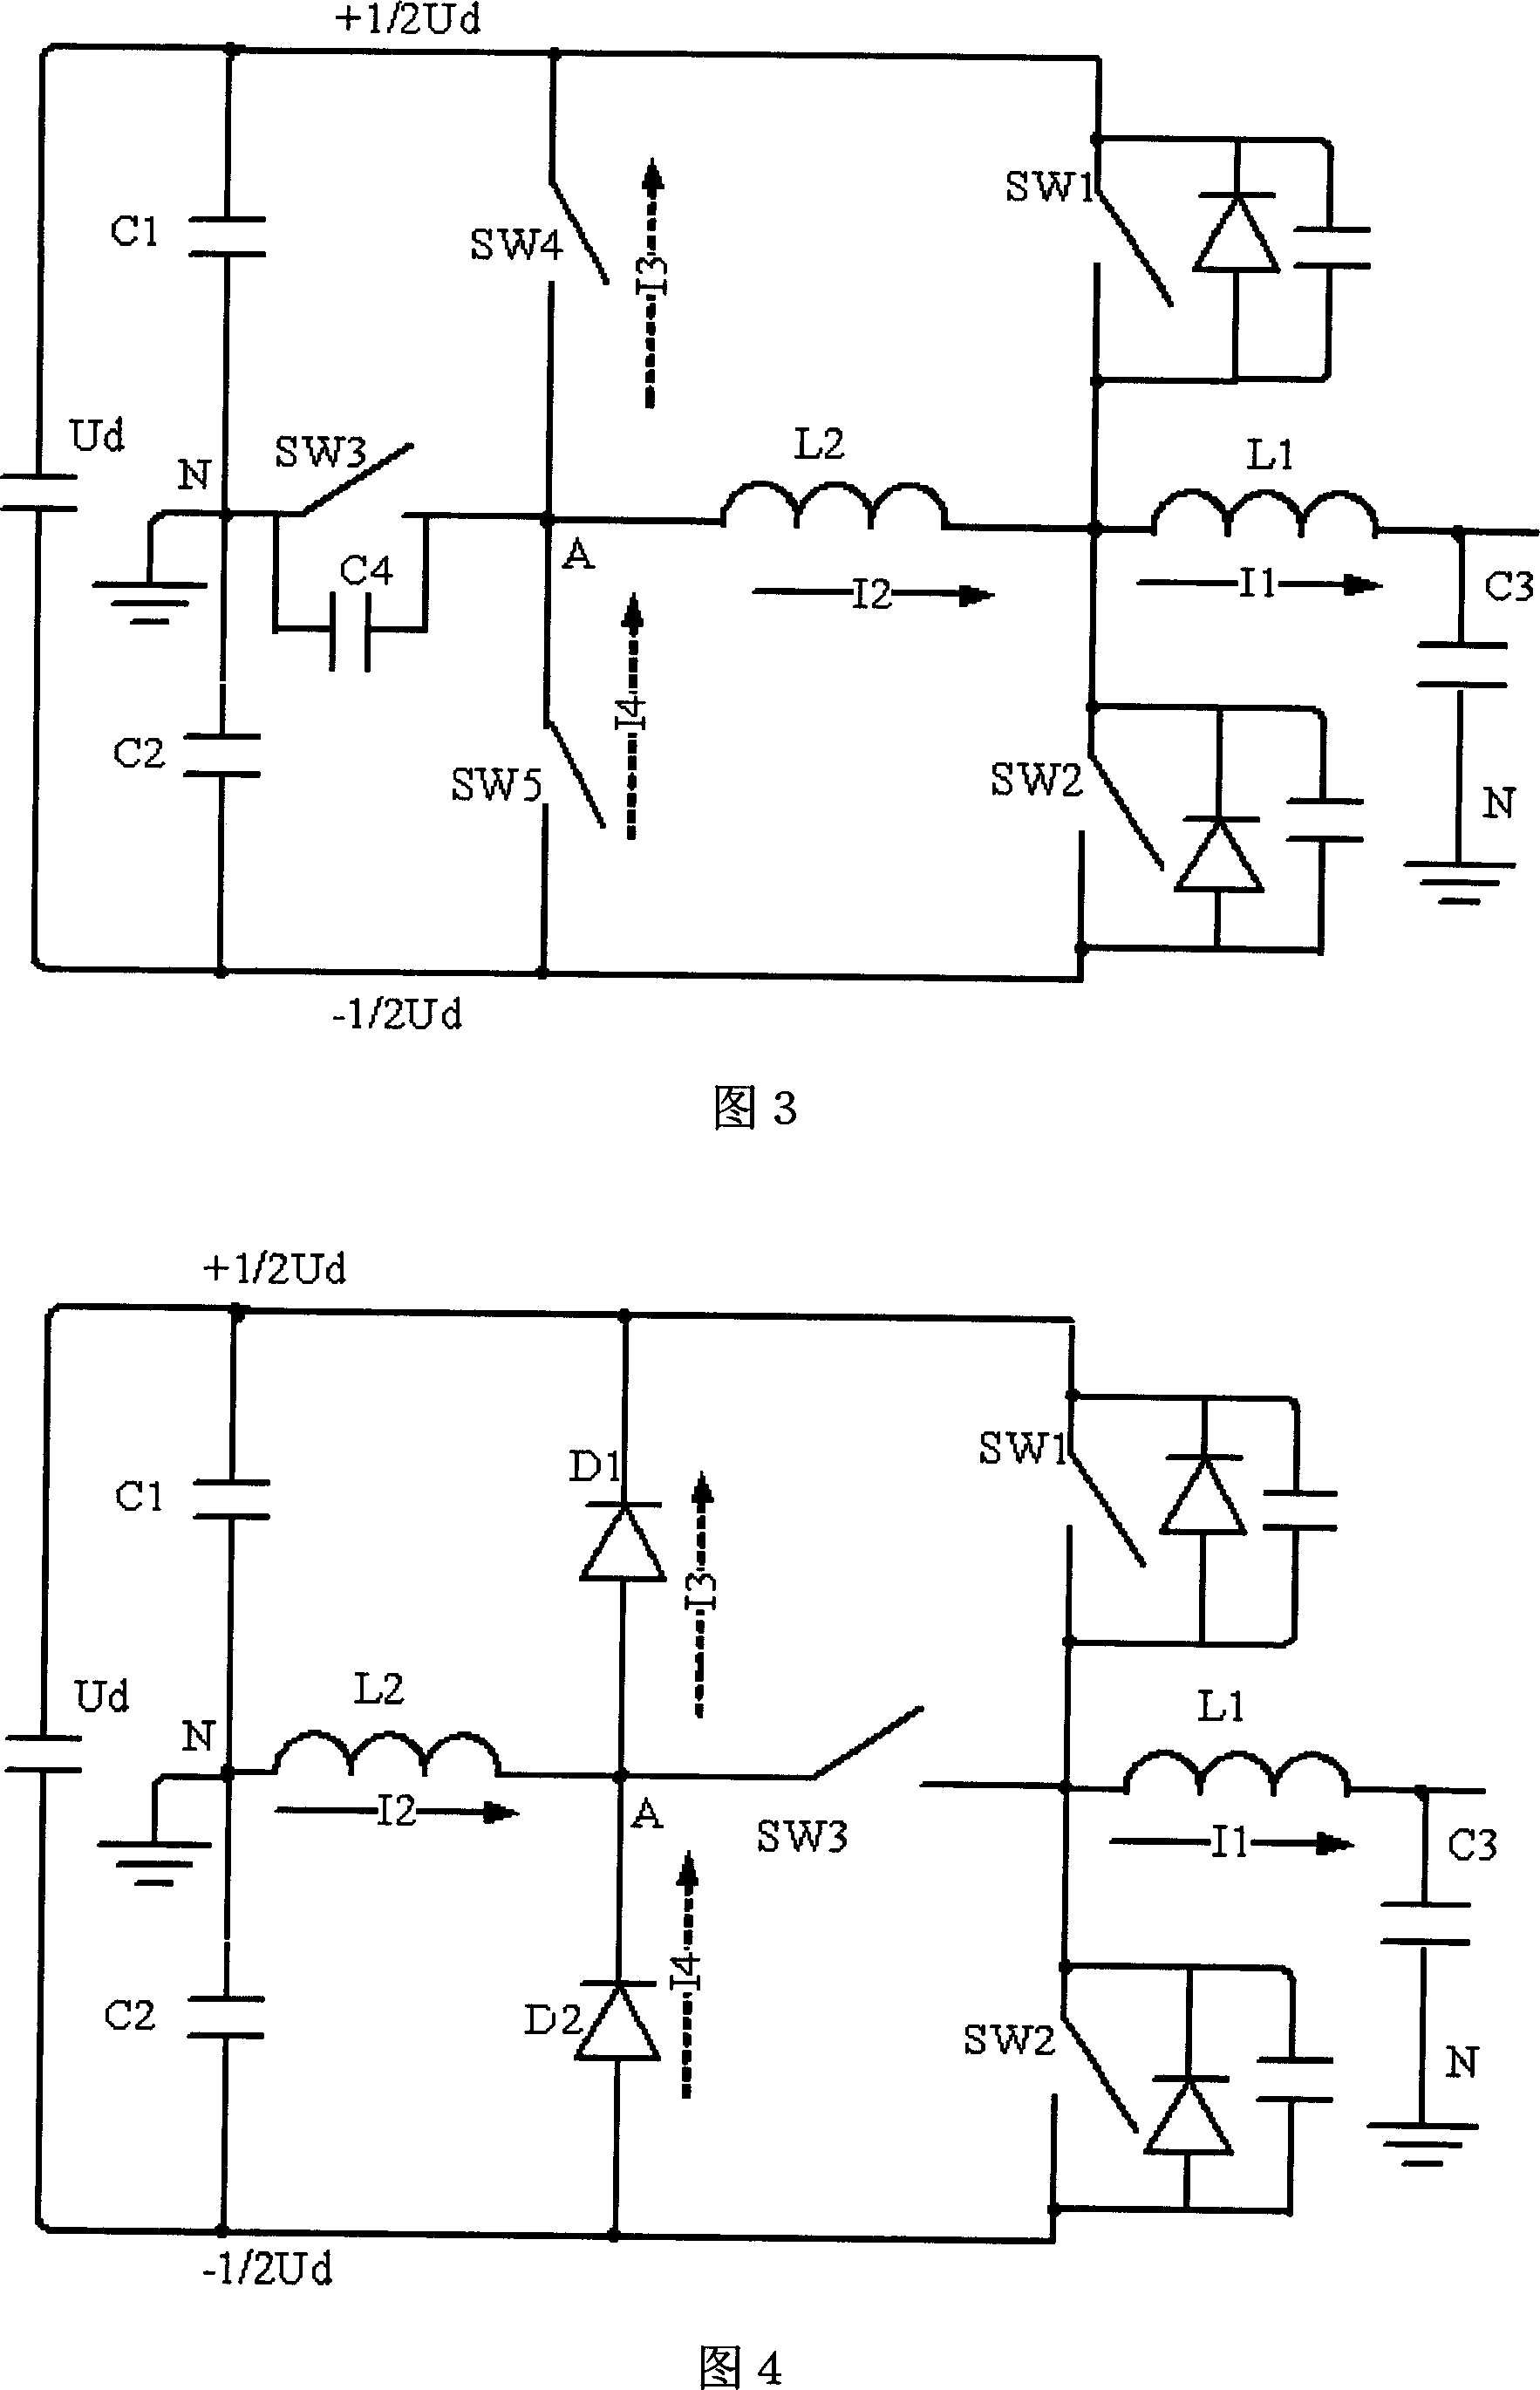 An ARCP soft switch circuit with voltage clamp function